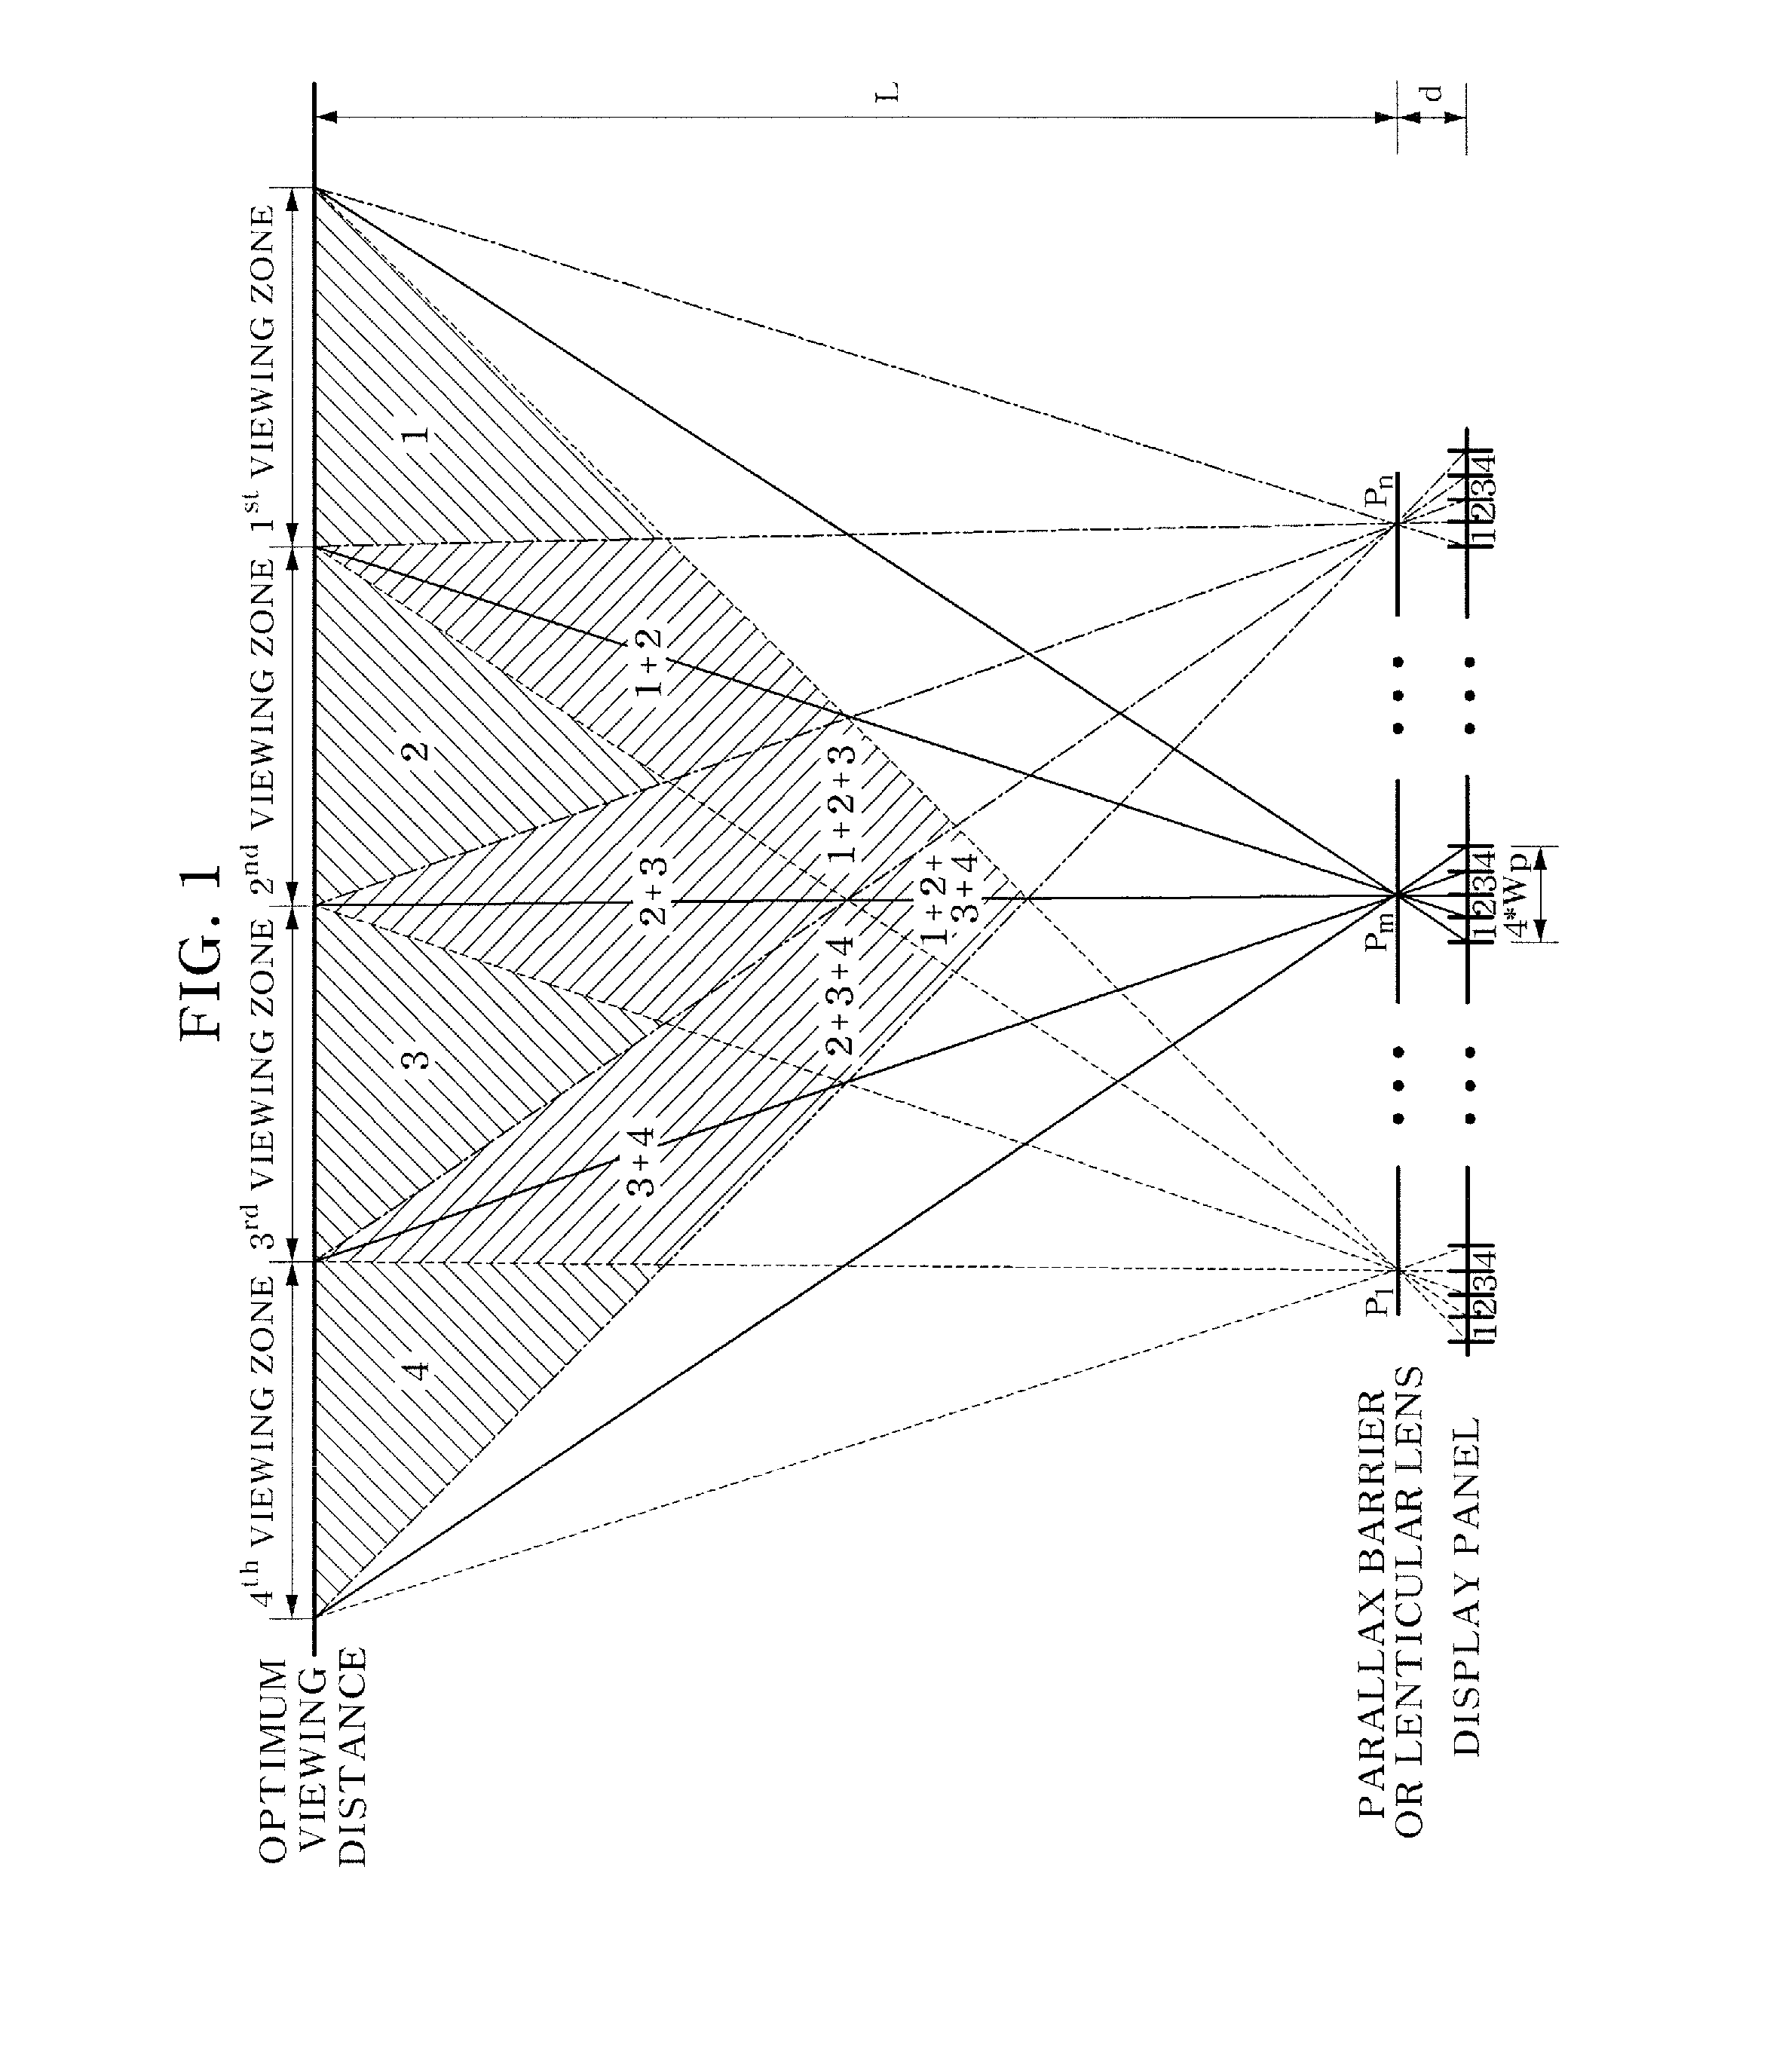 Multi-view 3D image display apparatus using modified common viewing zone